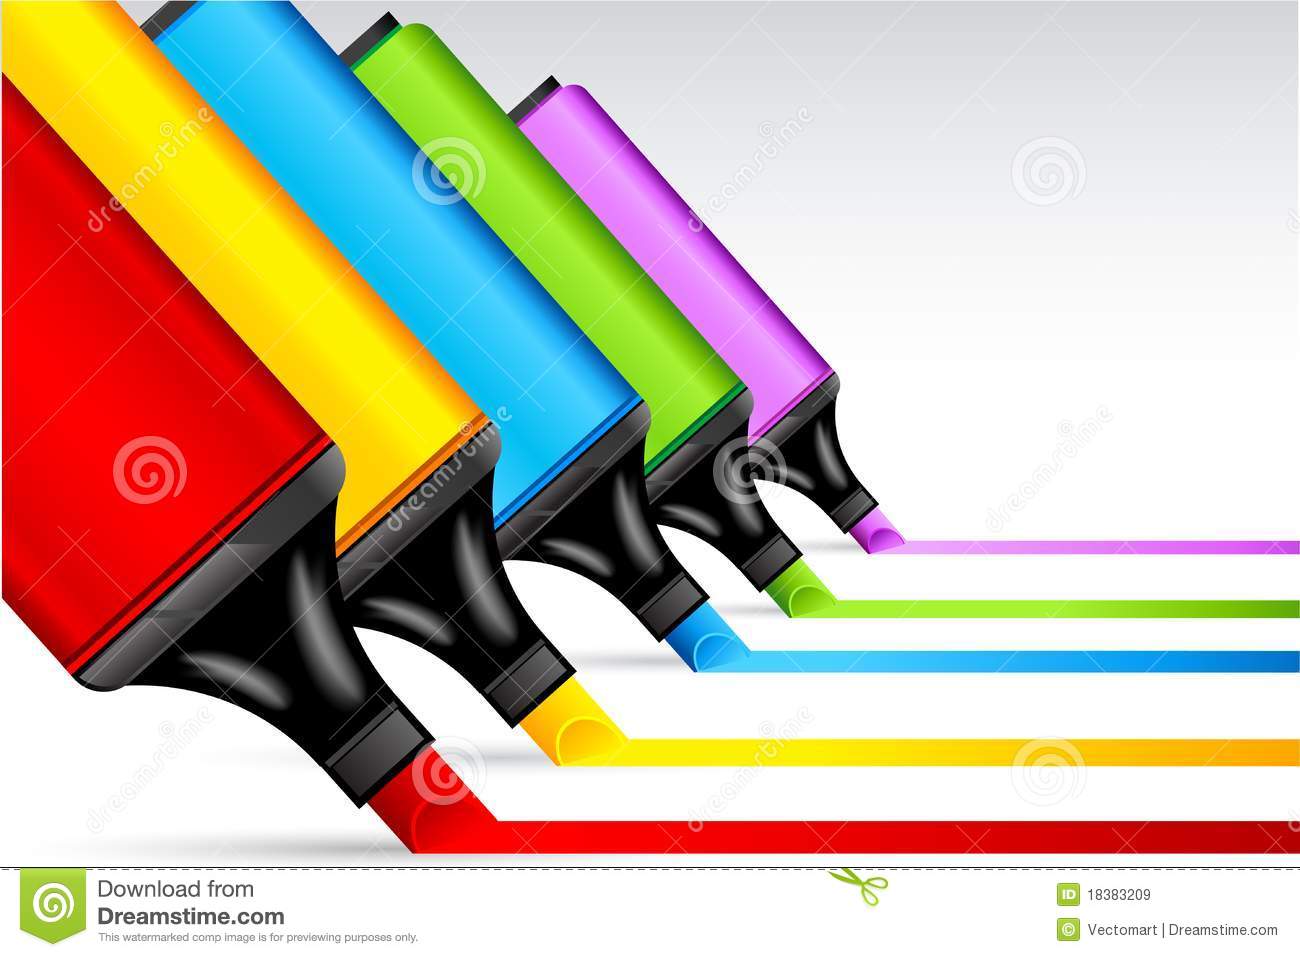 Colorful Highlighter Pen Royalty Free Stock Images   Image  18383209